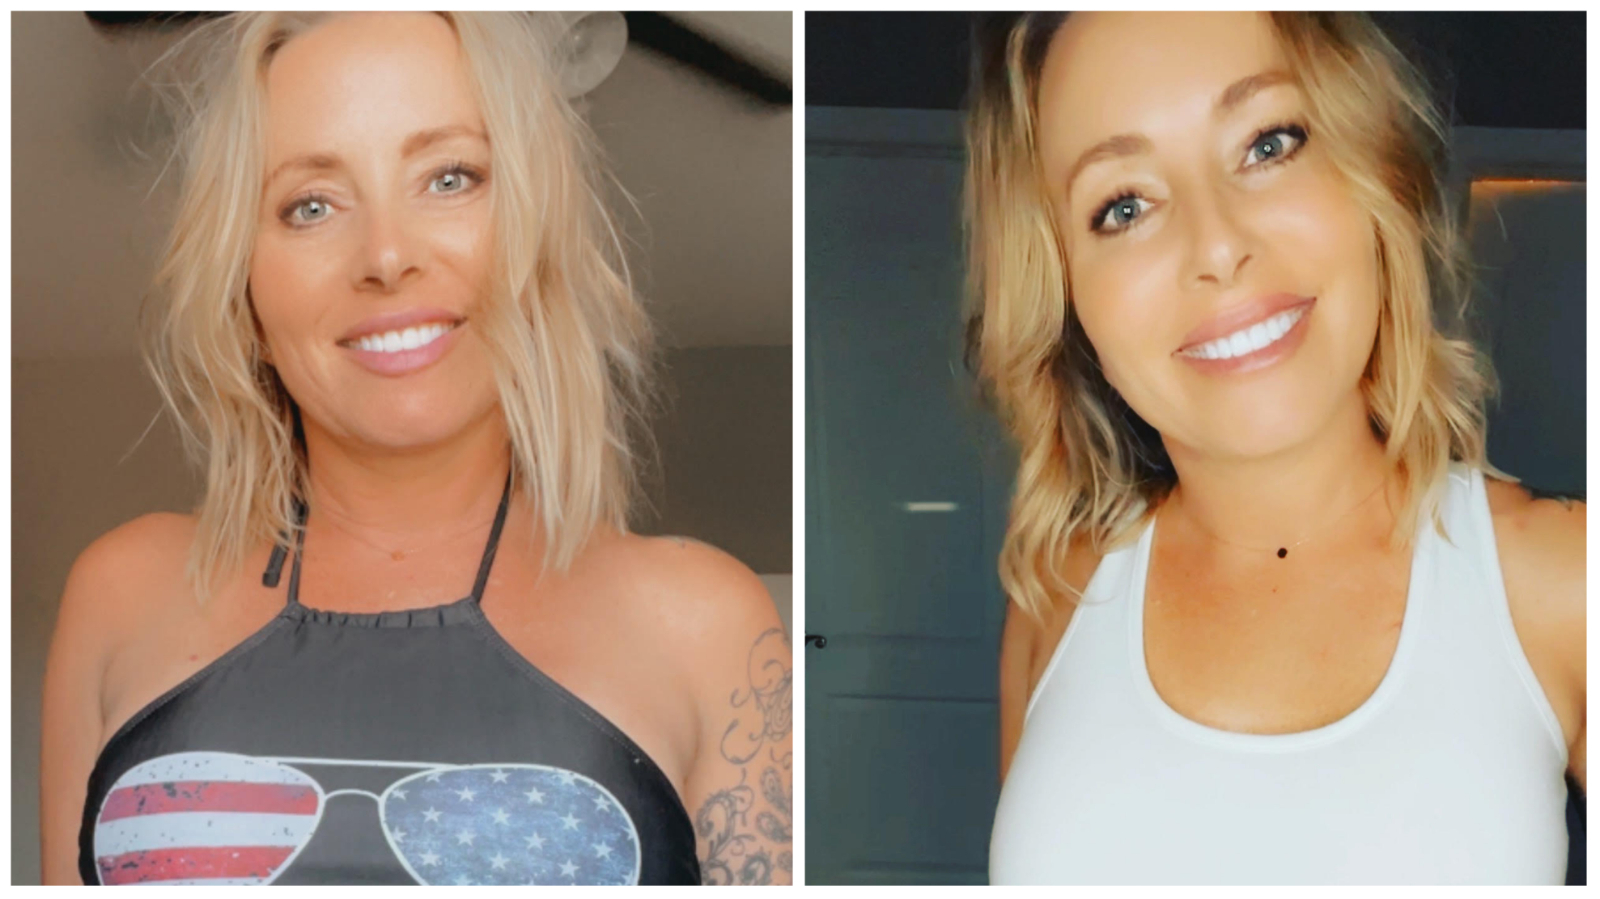 Regional Small-Town Mom Ignores The Haters While Making Big Money On Adult Site “OnlyFans” Your Wyoming News Source picture